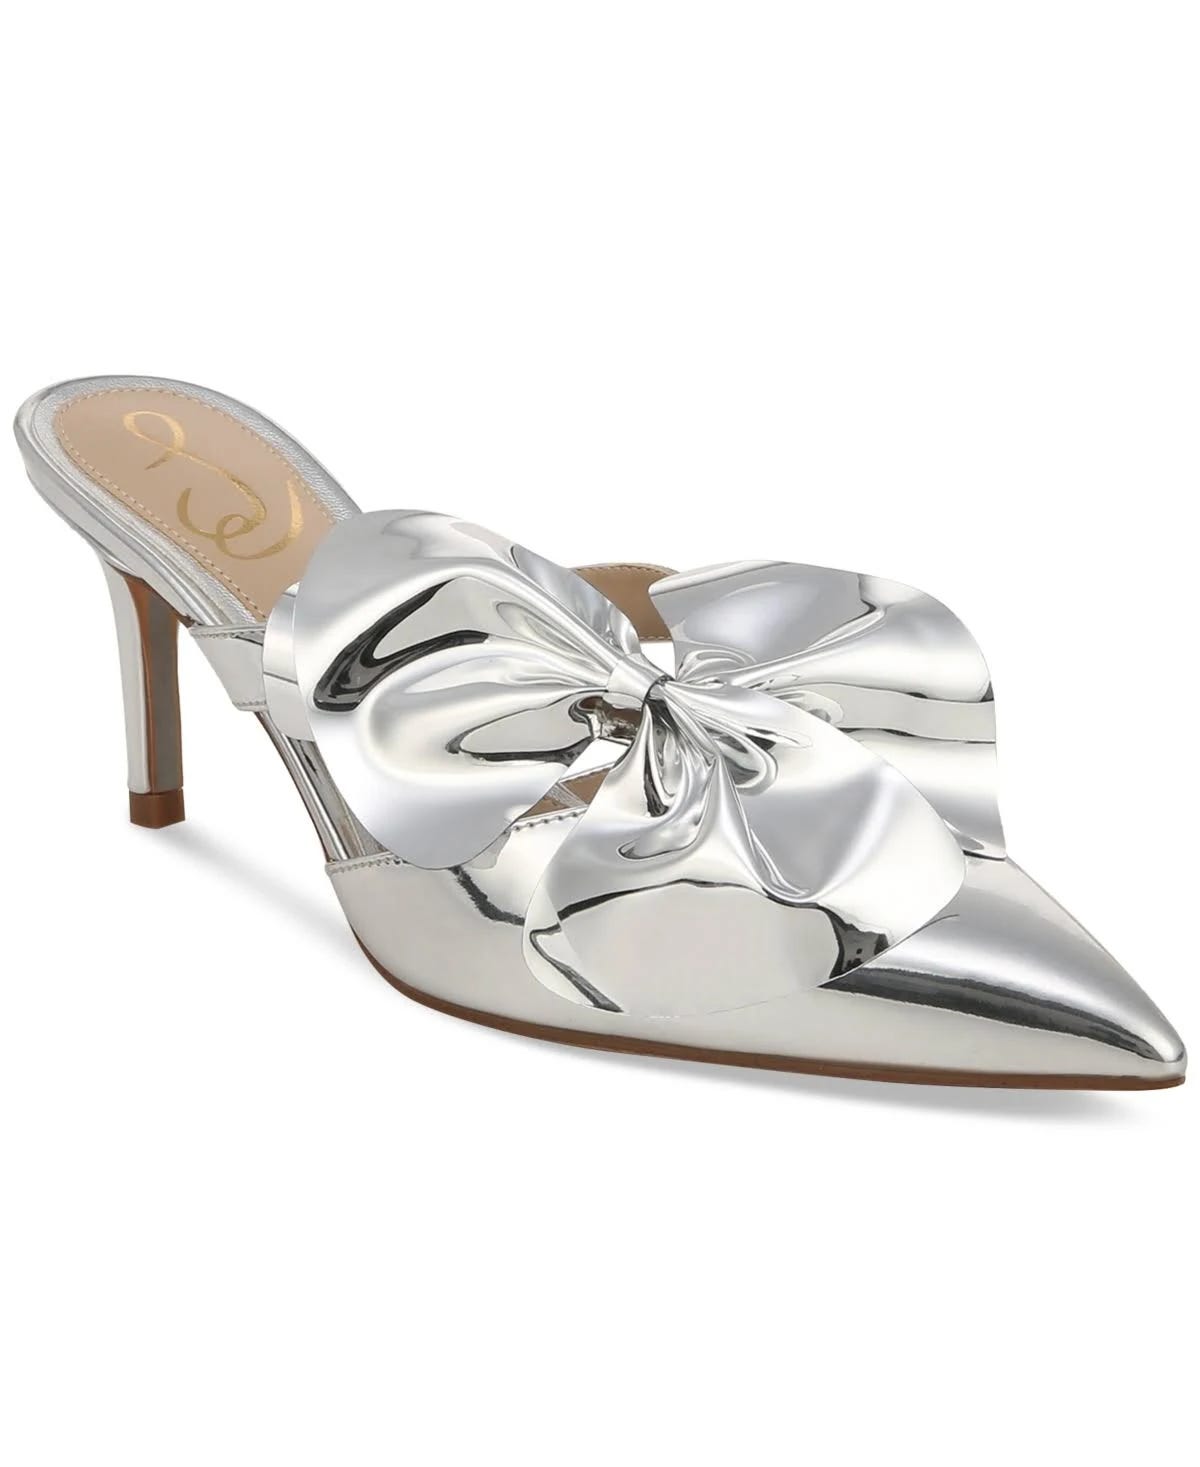 Elegant Silver Pointed-Toe Heels with Bow Detail | Image